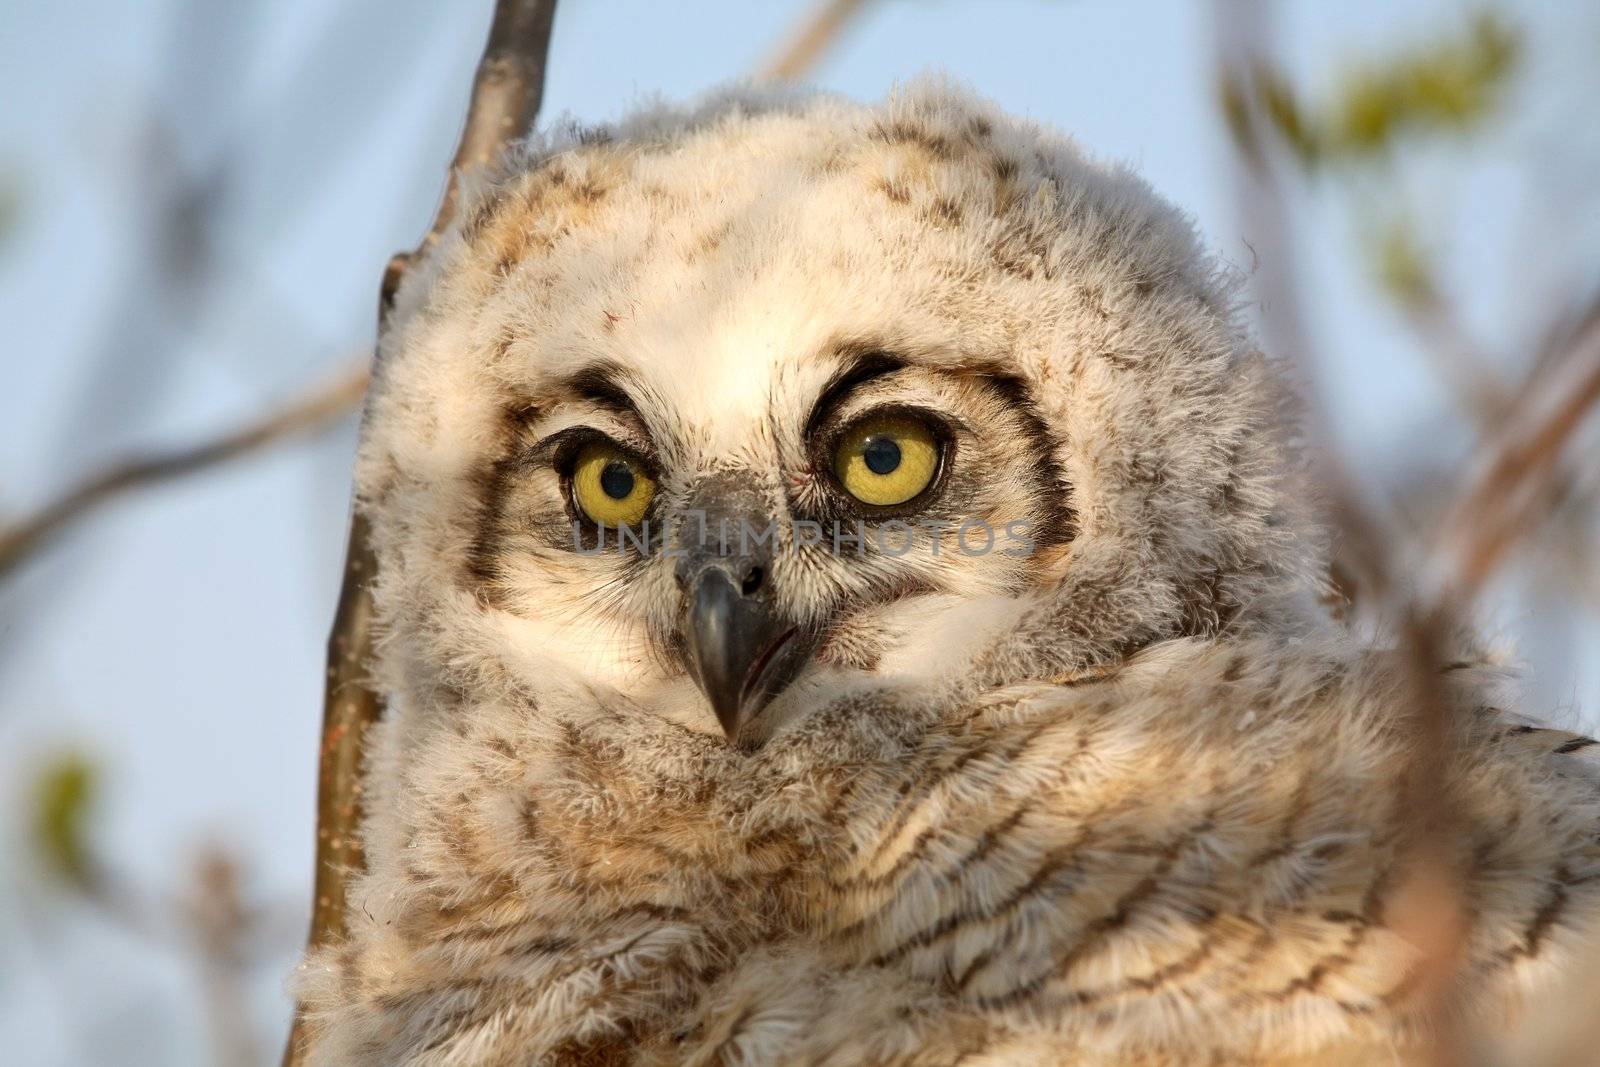 Great Horned Owl (Bubo virginianus) is a very large owl of the bird family Strigidae. They are 56 cm or 22 inches in length and have a wingspan of 91-152 cm or 35-59 inches.